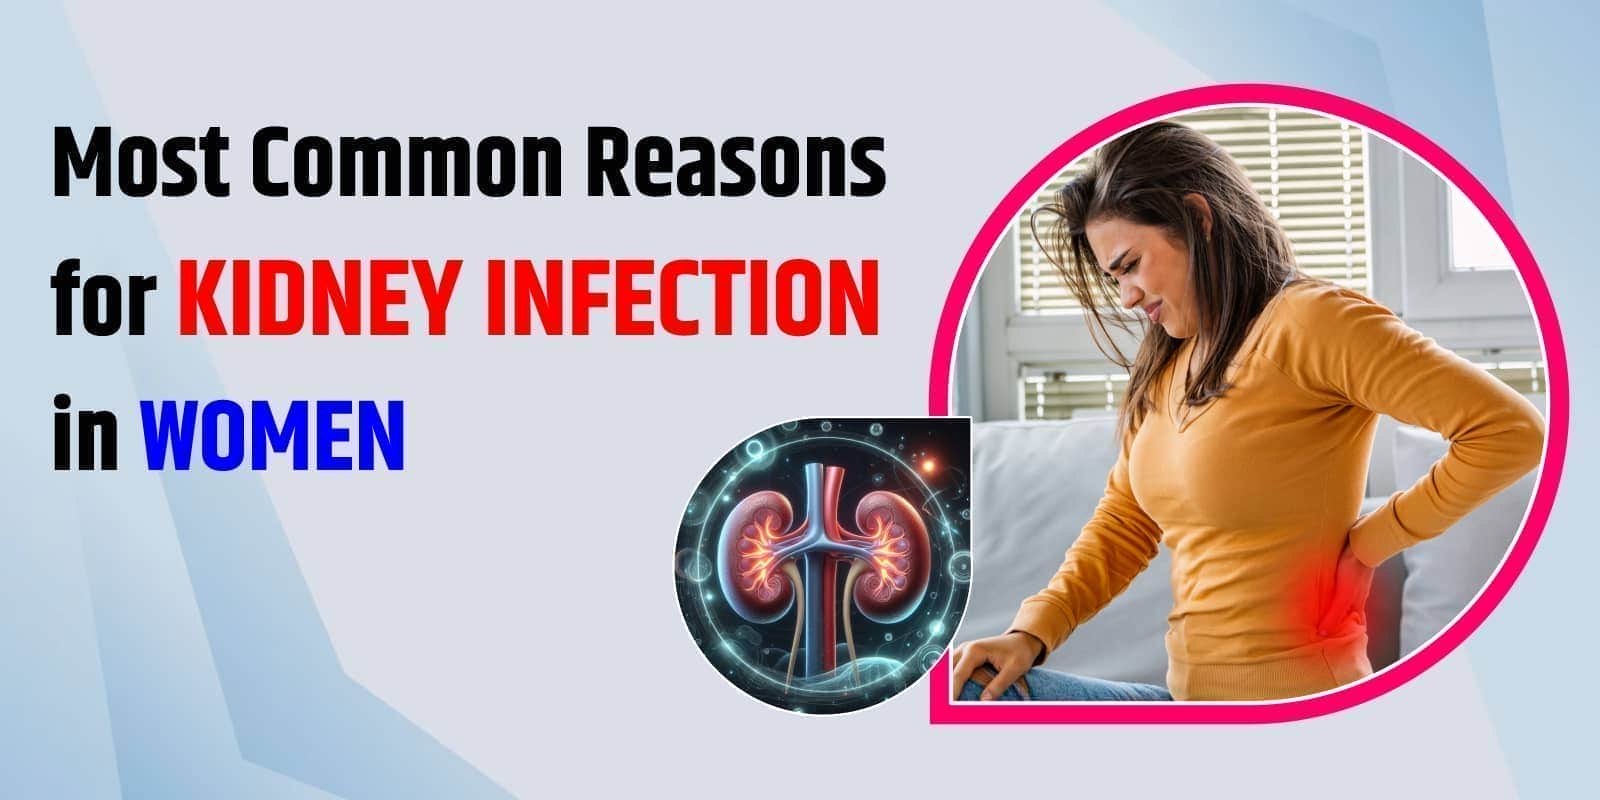 Most Common Reasons for Kidney Infection in Women